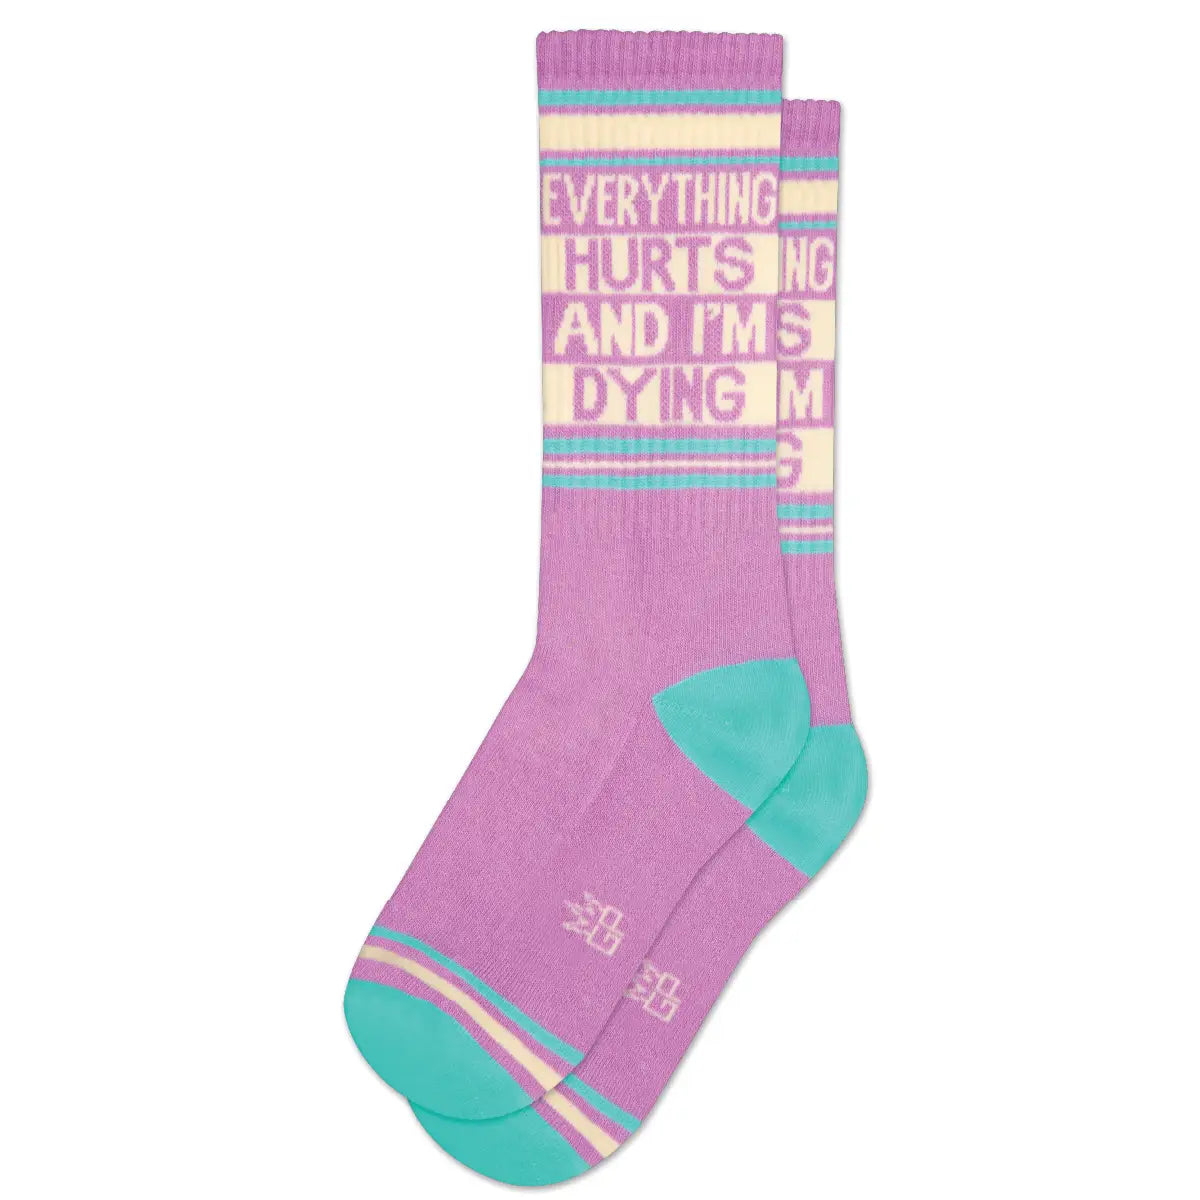 EVERYTHING HURTS AND I'M DYING CREW SOCKS